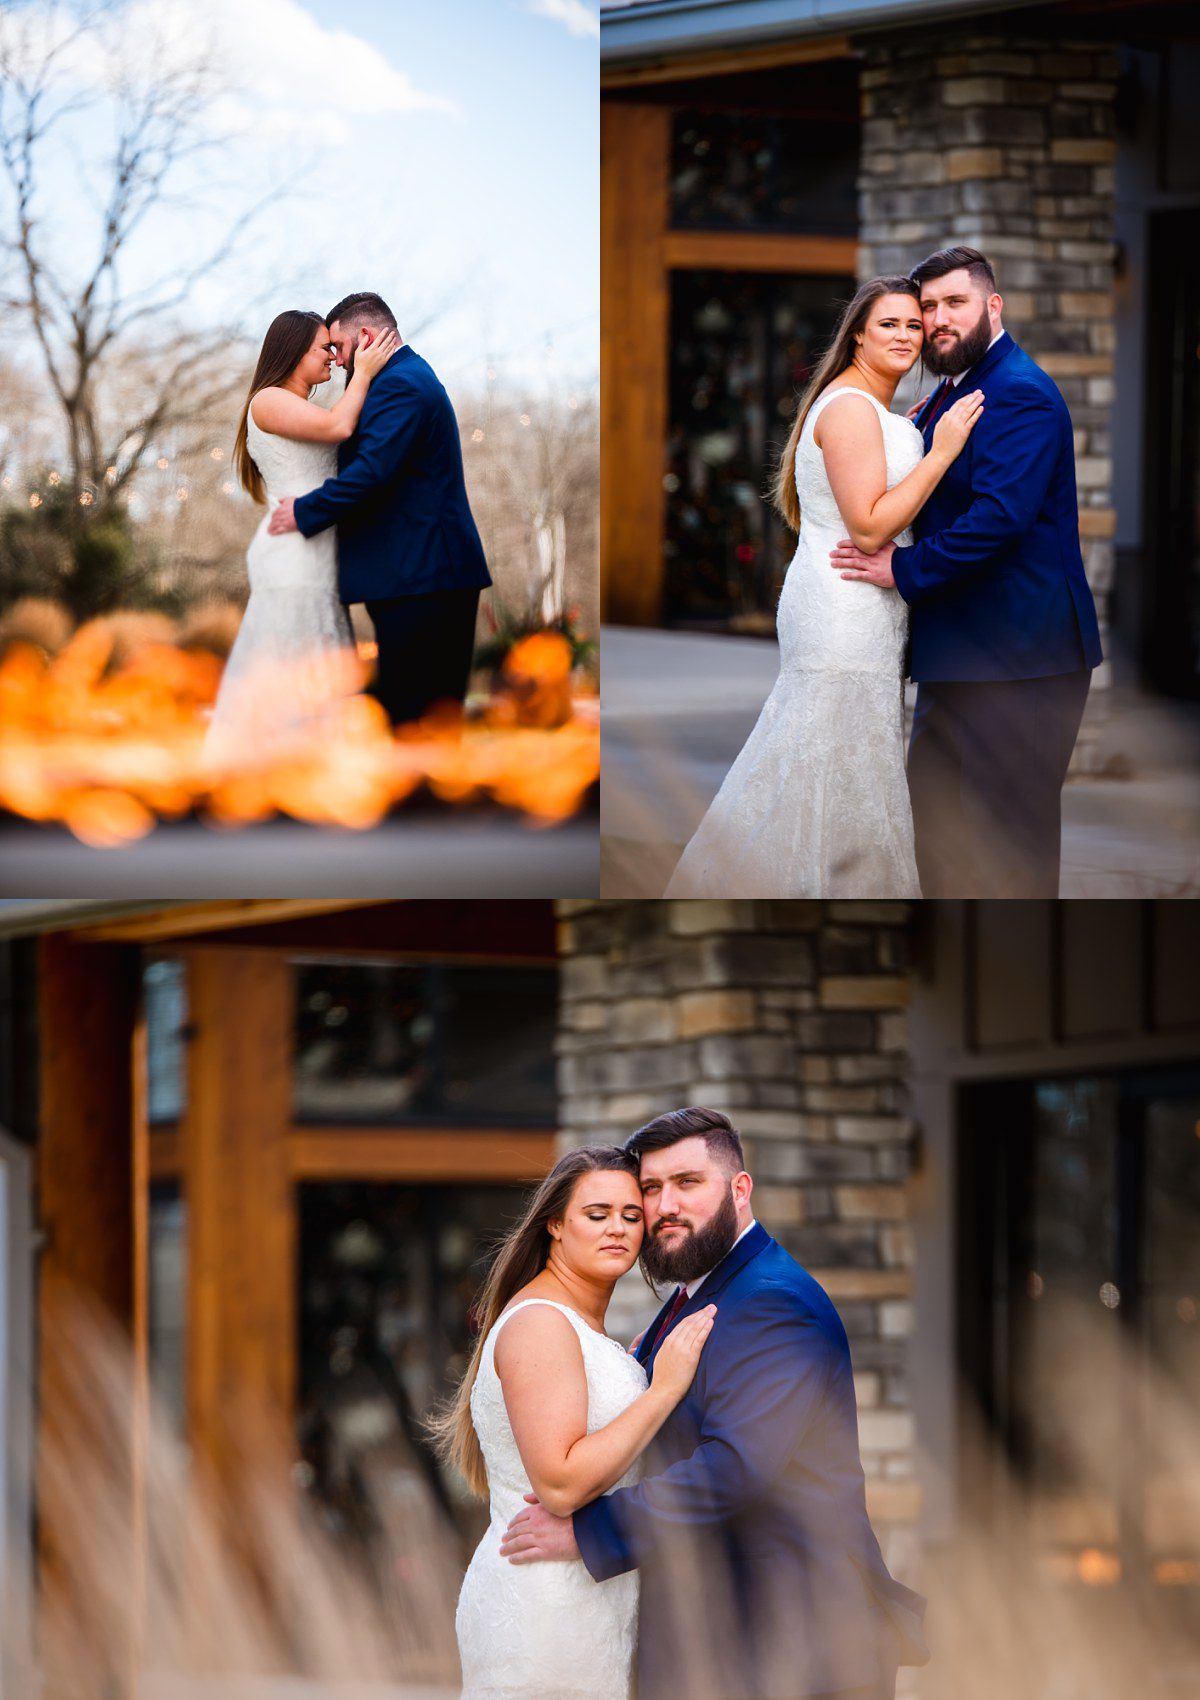 Carmel, Noblesville, Anderson, Muncie, Fishers, Westfield Indianapolis wedding photographer